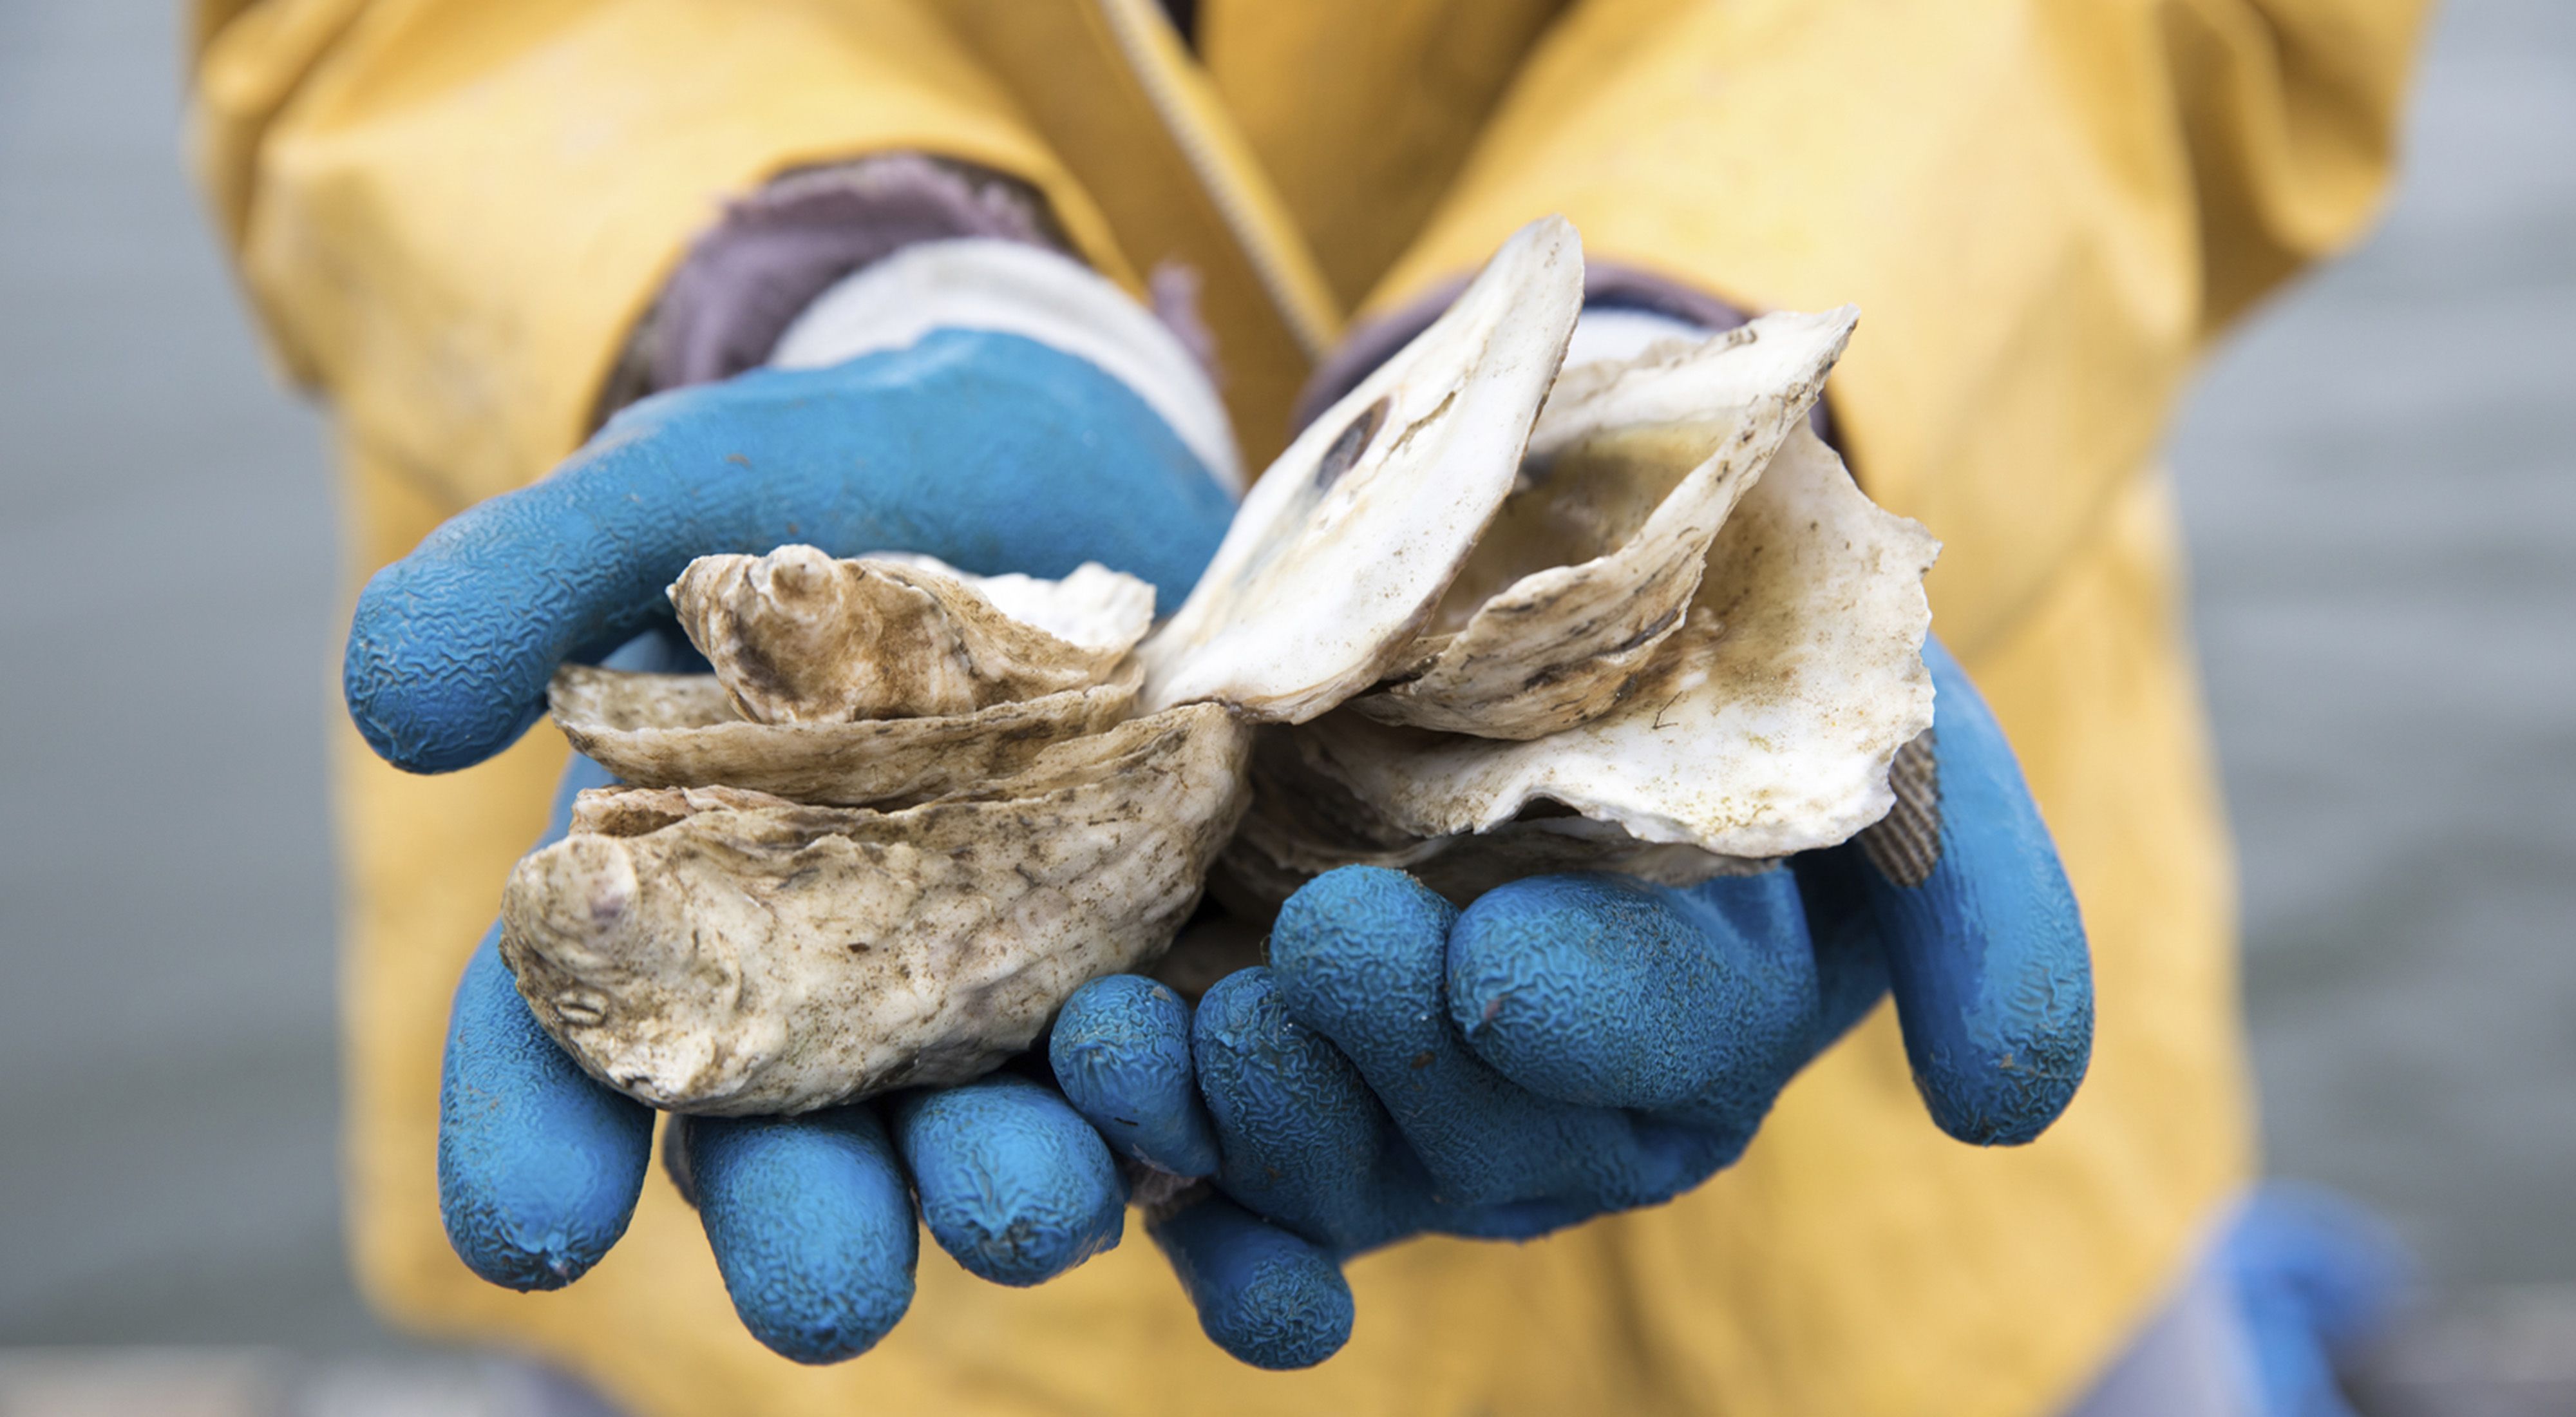 Two gloved hands hold oysters.